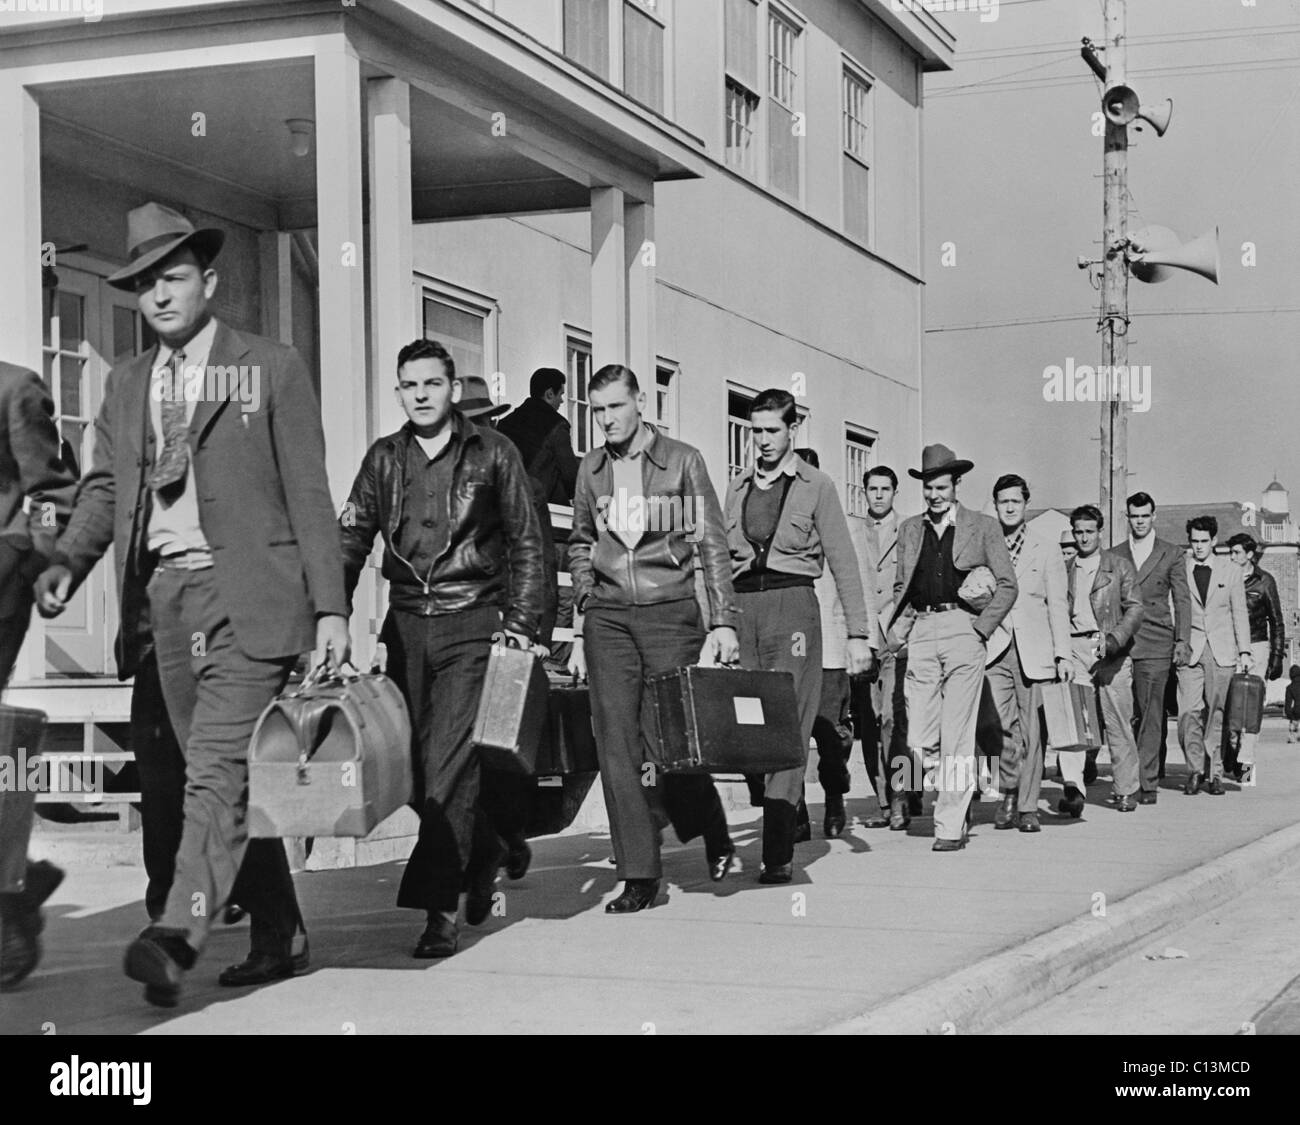 Enrollees from across the country arriving at the United States Maritime Service training station at Sheepshead Bay New York. During World War II the station had 10 000 apprentice seamen in training for the American Merchant Marine. 1943. LC-USW33-026129-C Stock Photo